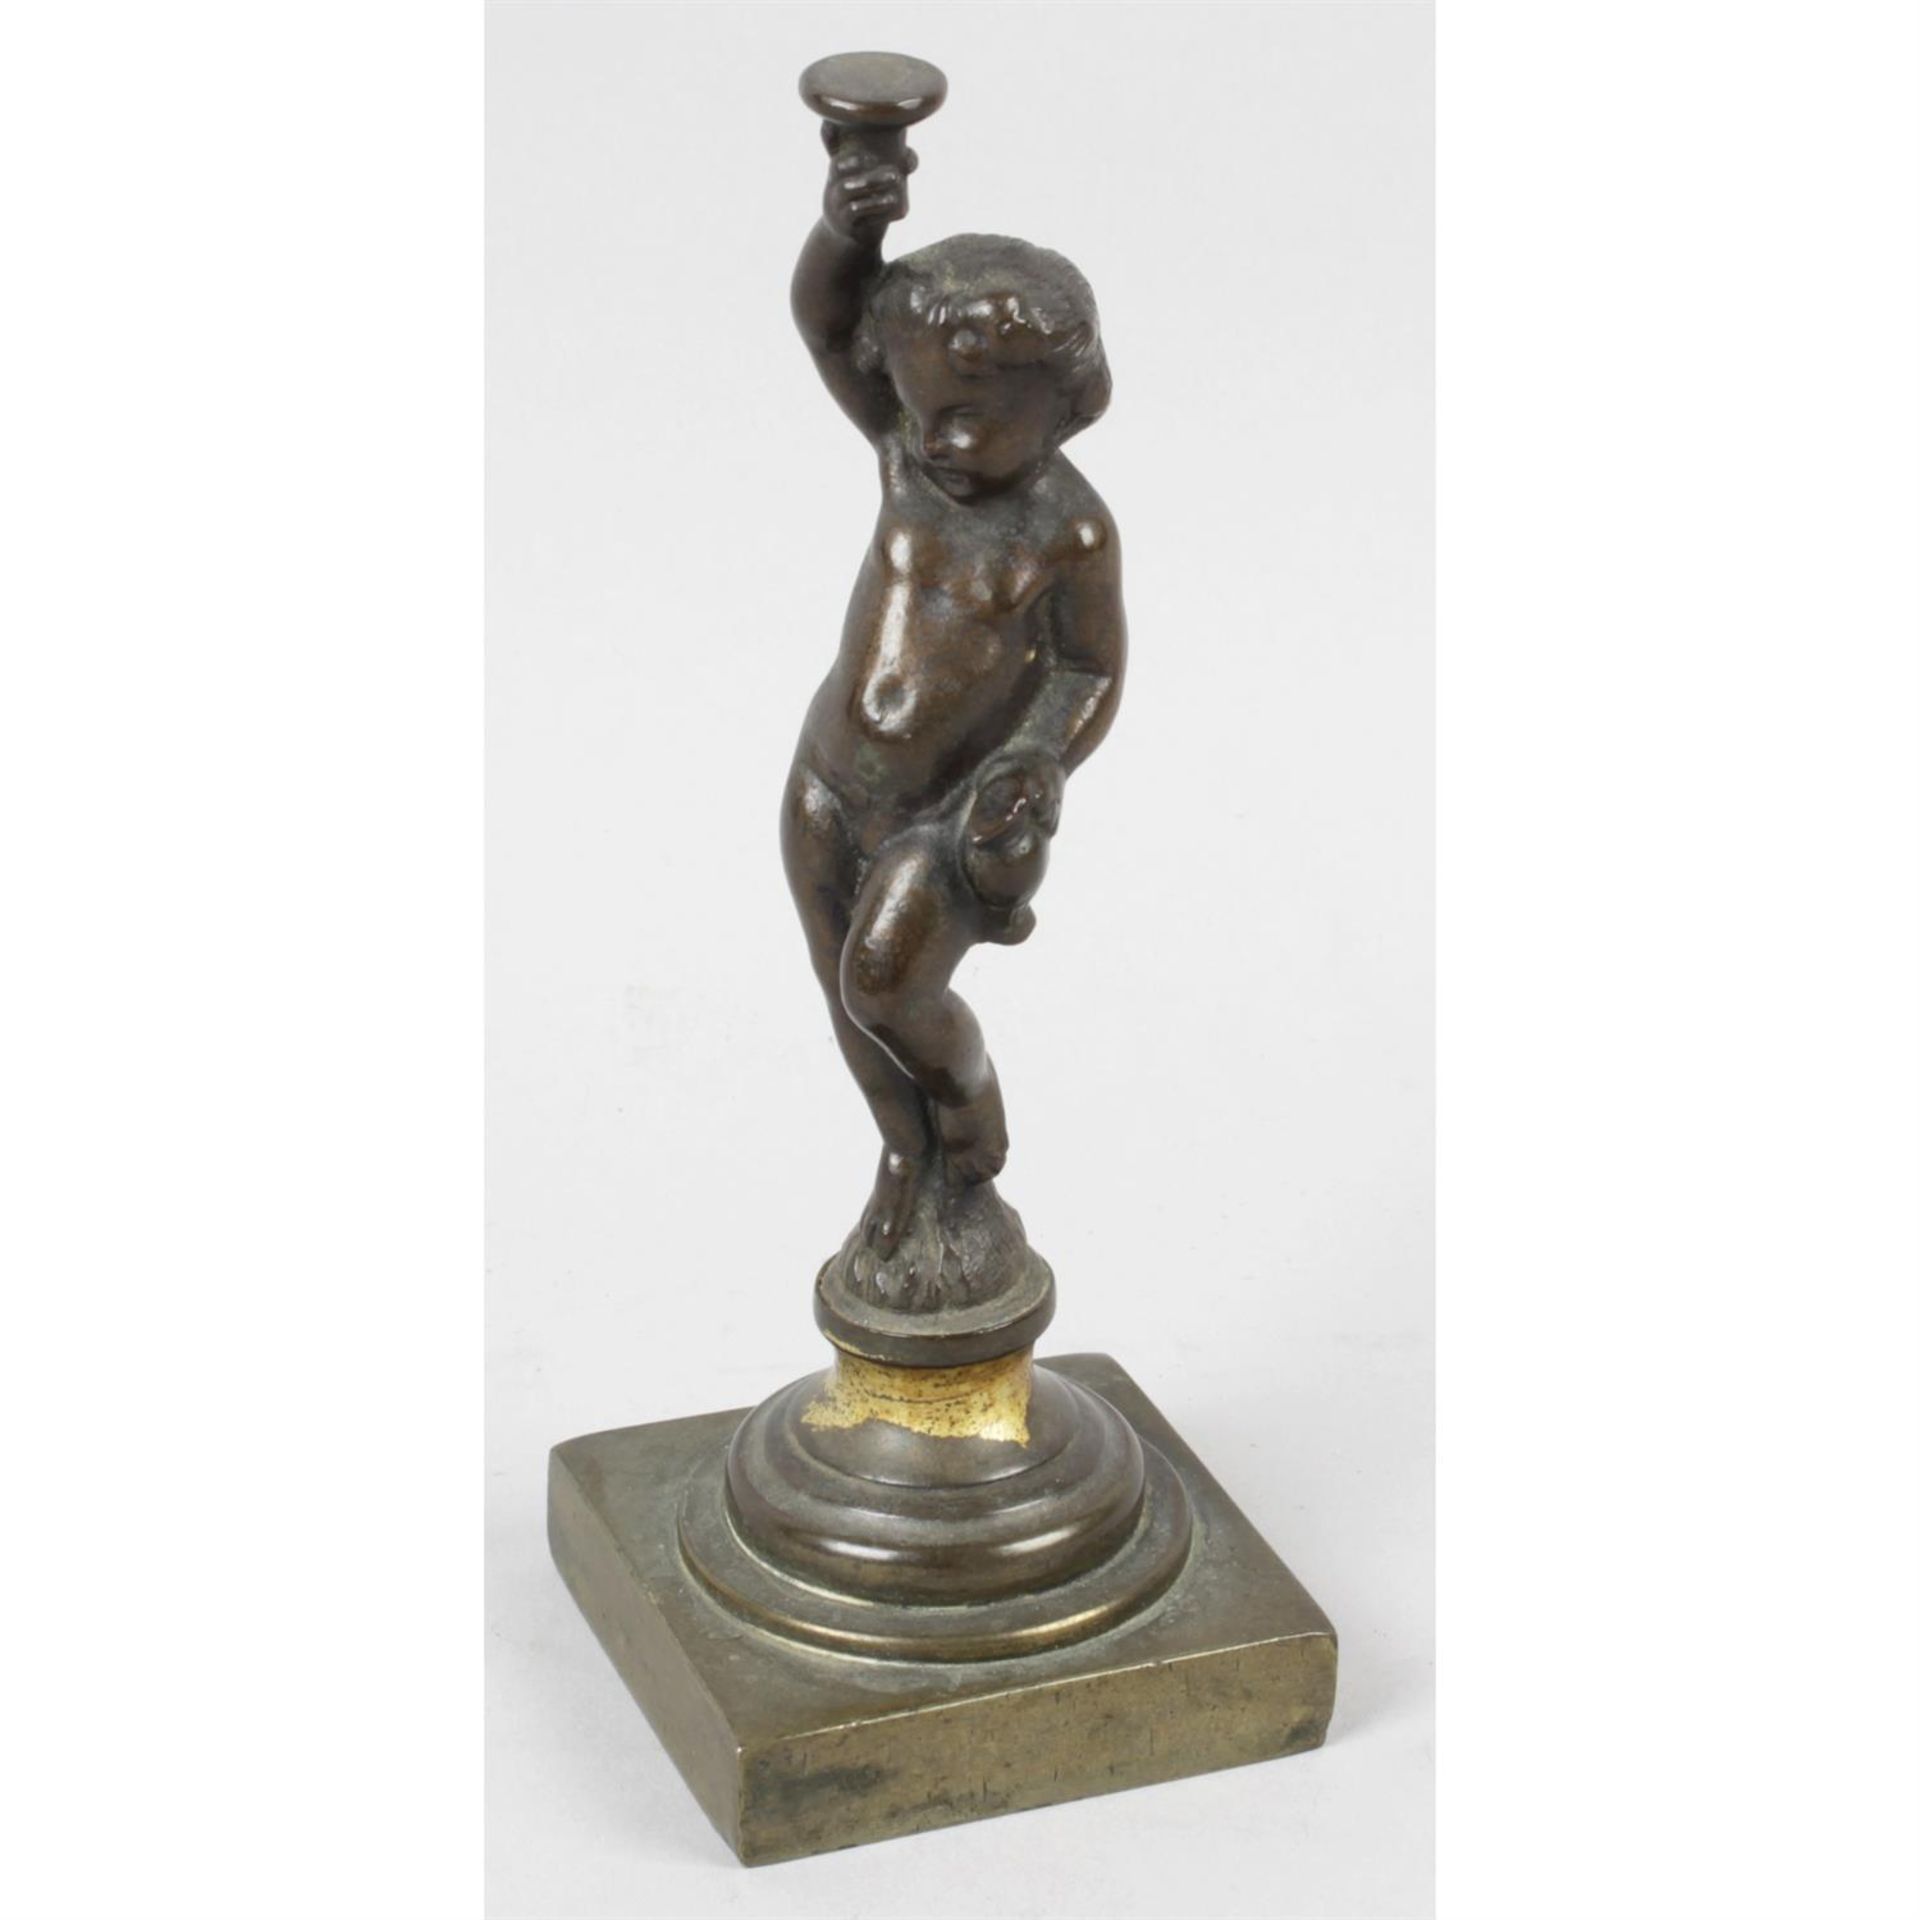 A 19th century bronze figure modelled as Putto.